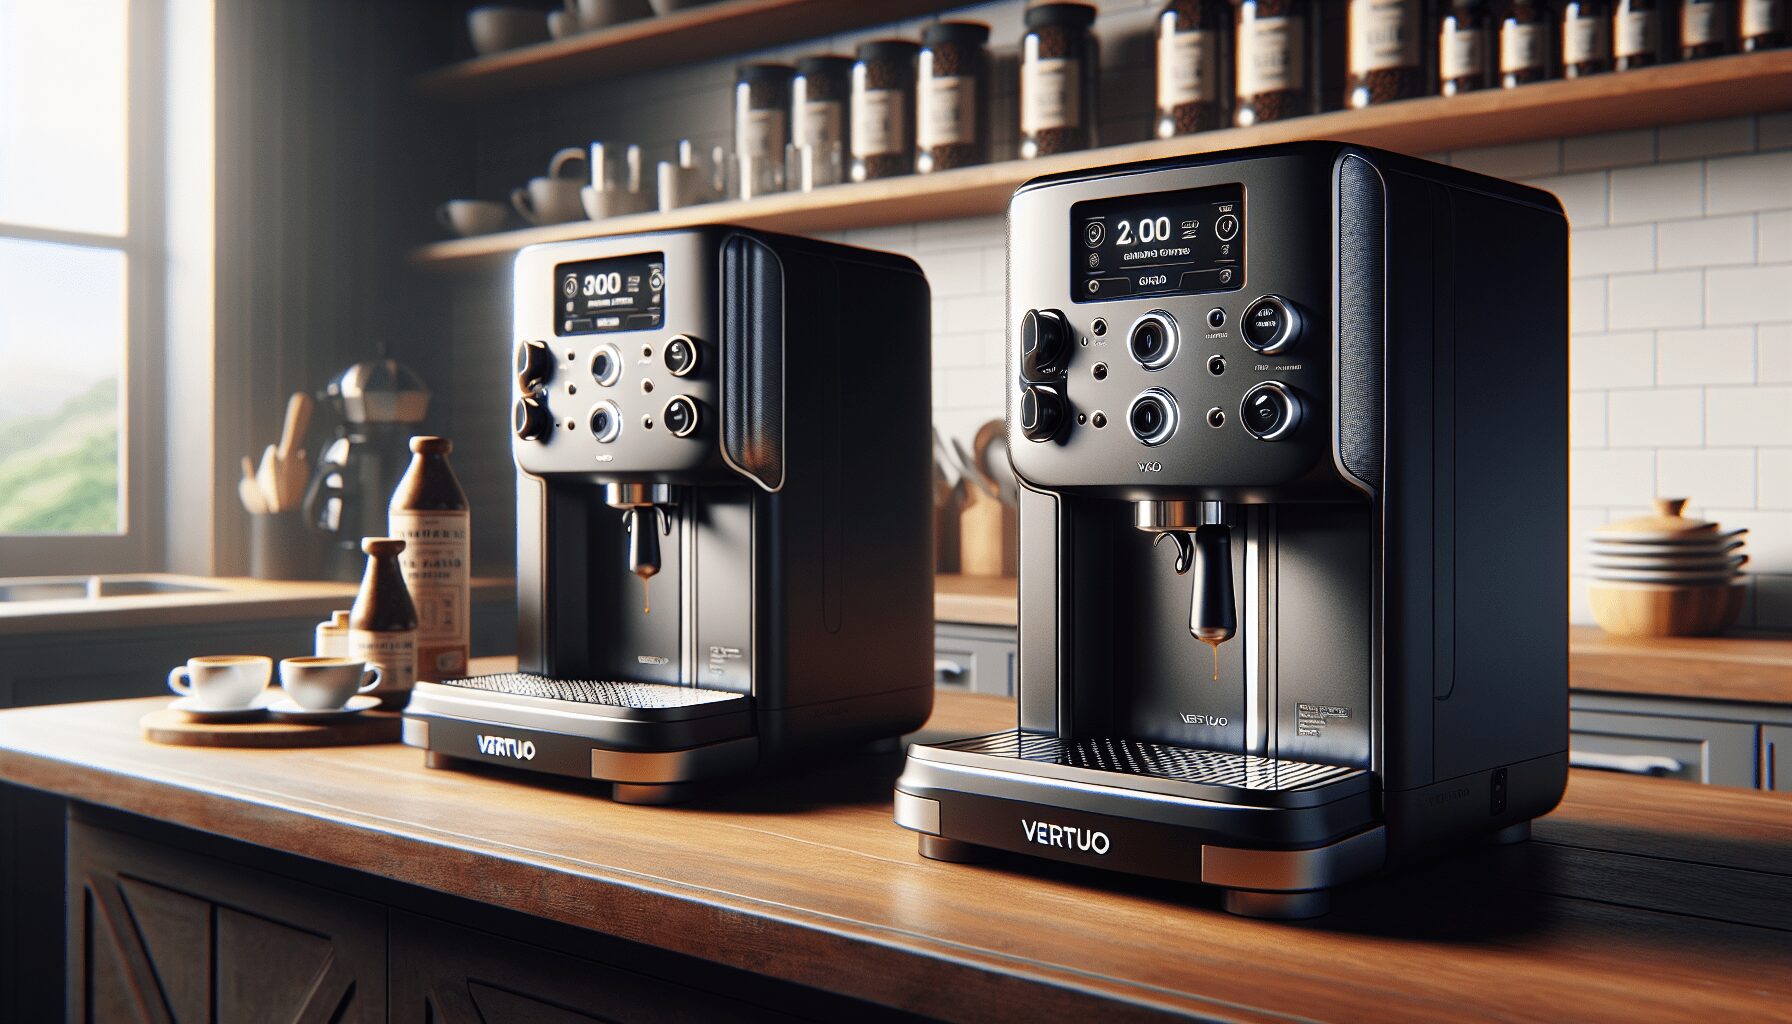 Comparing the Vertuo and VertuoPlus Coffee Machines